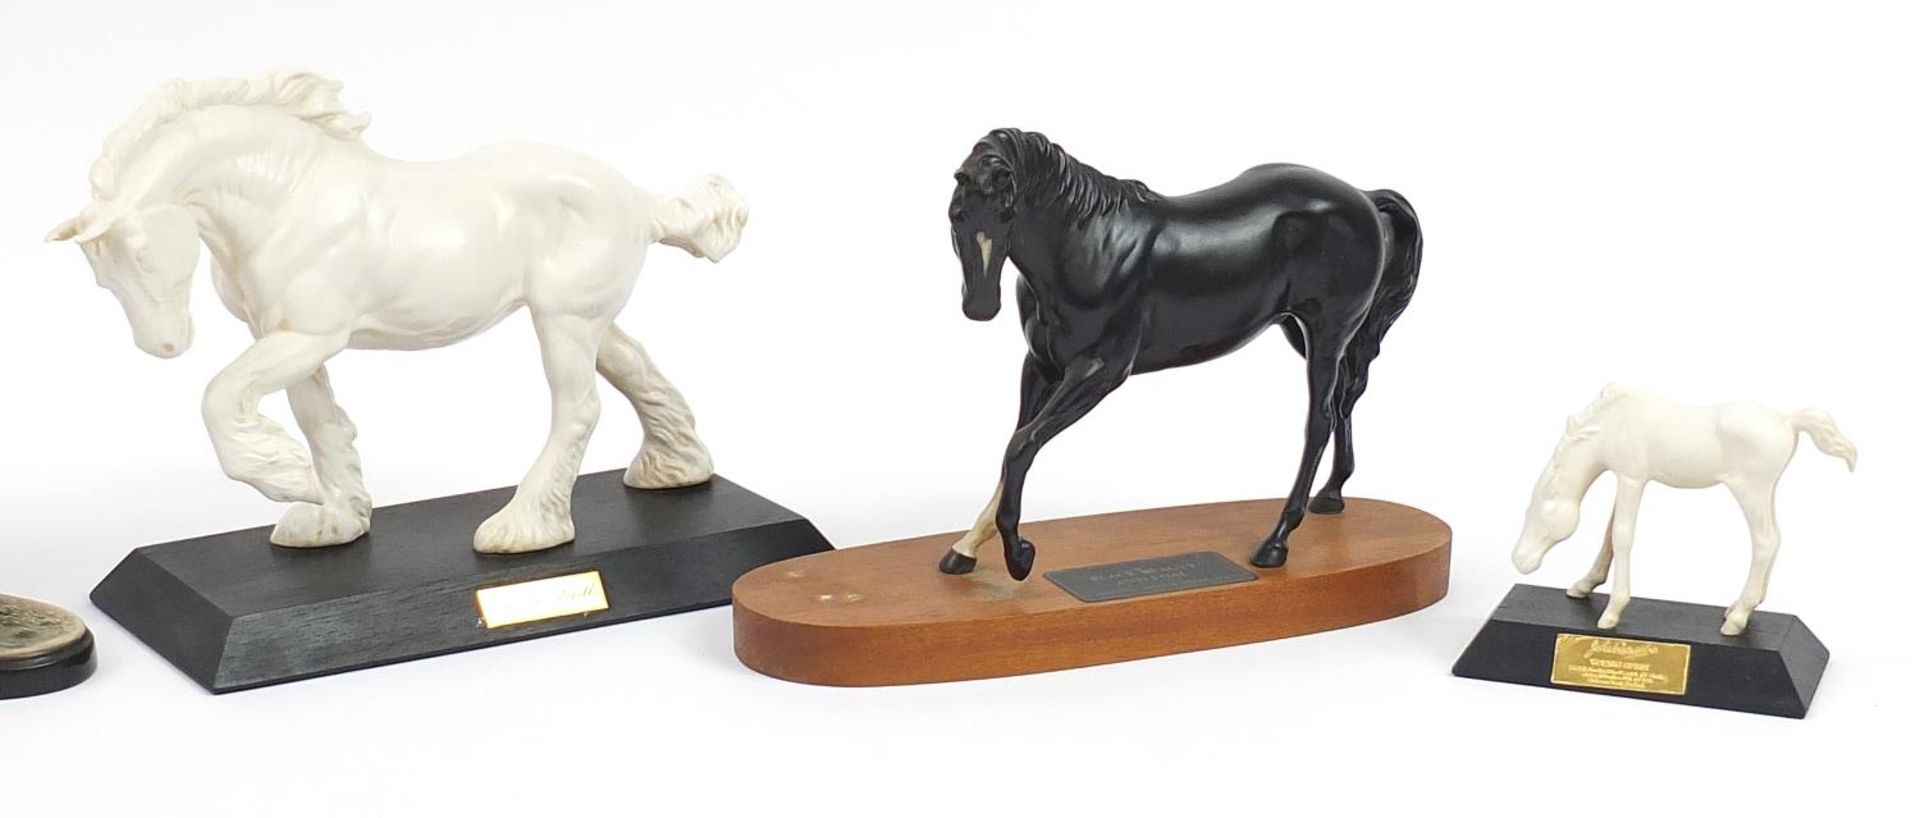 Six Beswick horses including Black Beauty & Foal and Sprit of Earth, the largest 29cm in length - Image 3 of 3